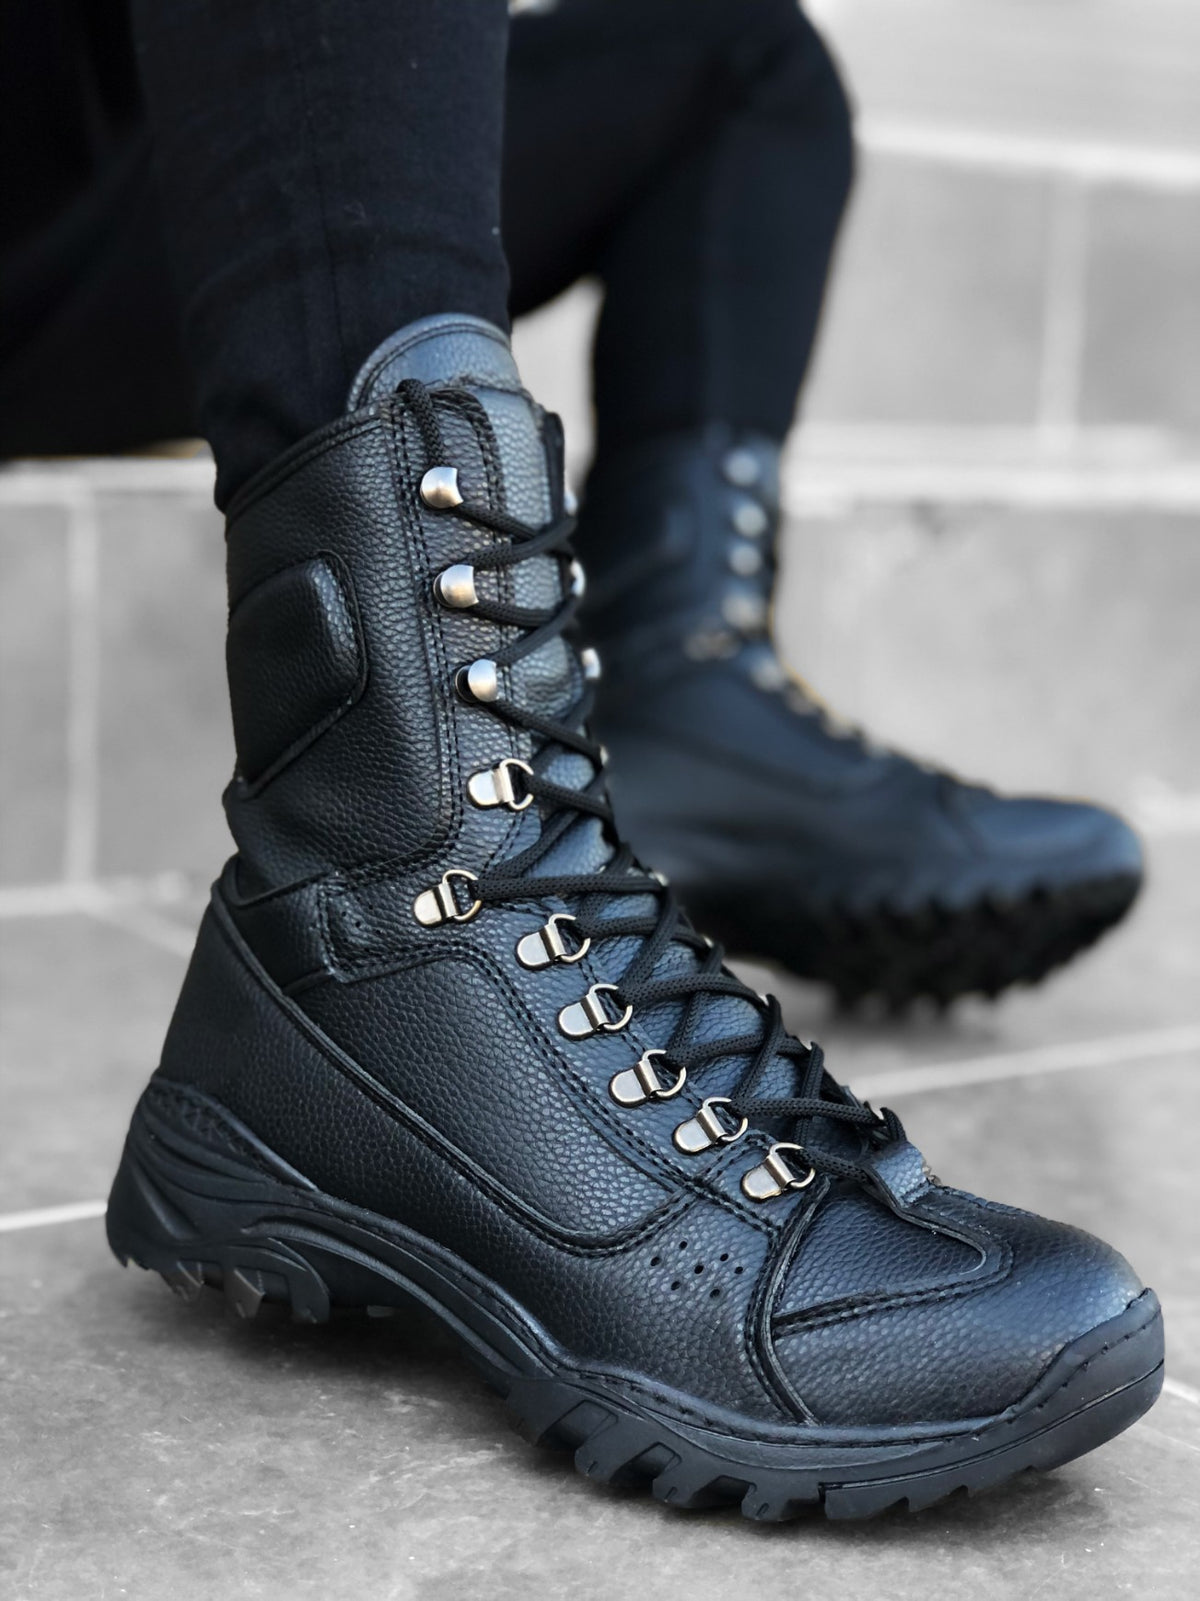 BA0605 Lace-up Black Skin Military Boots - STREETMODE ™